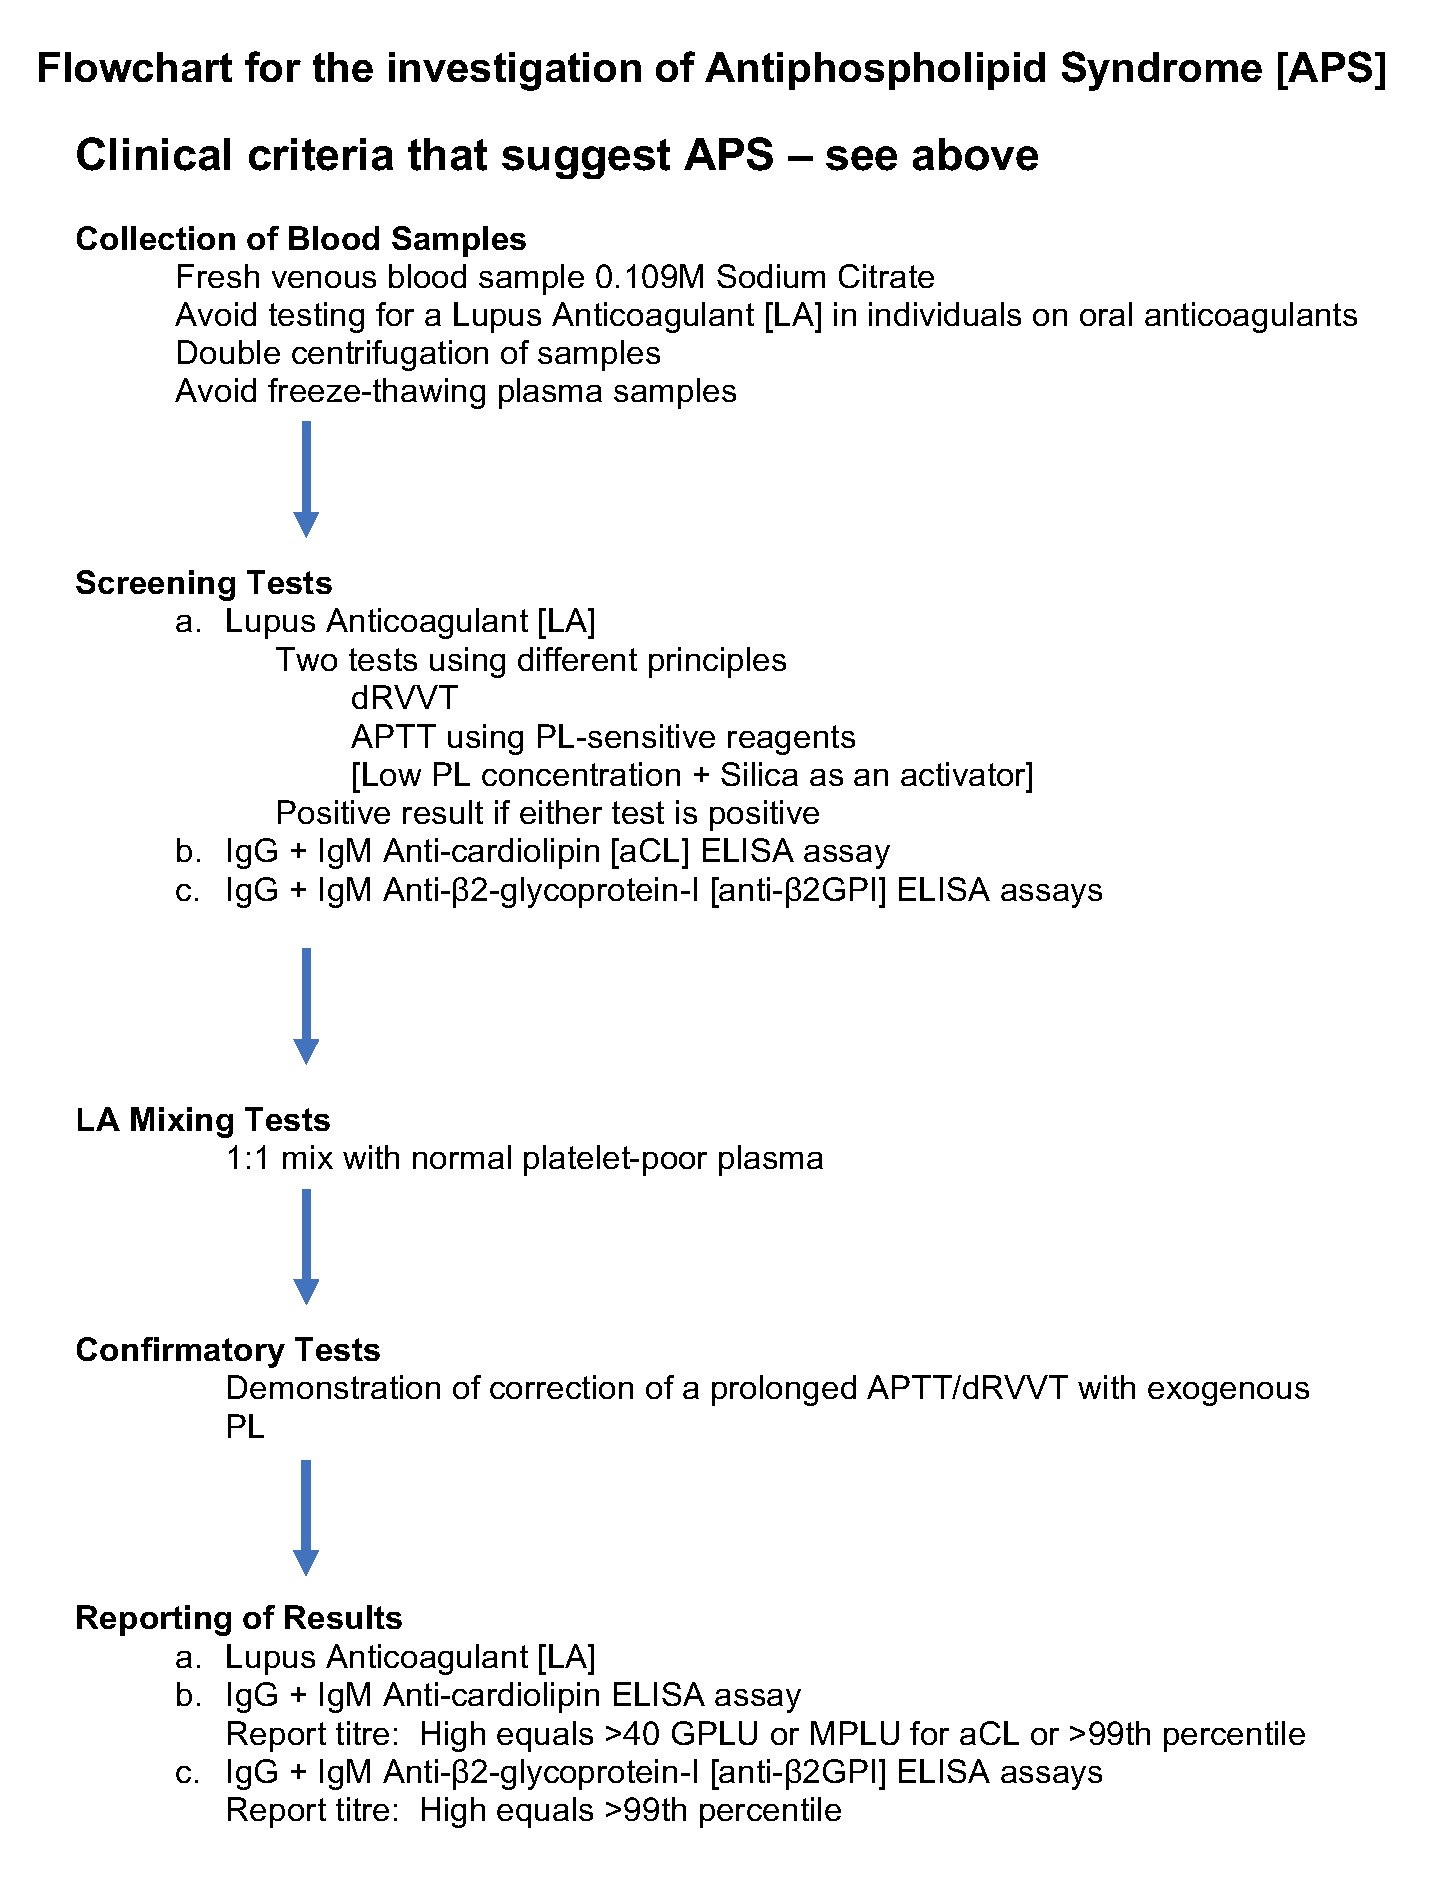 Flowchart for the investigation of APS 